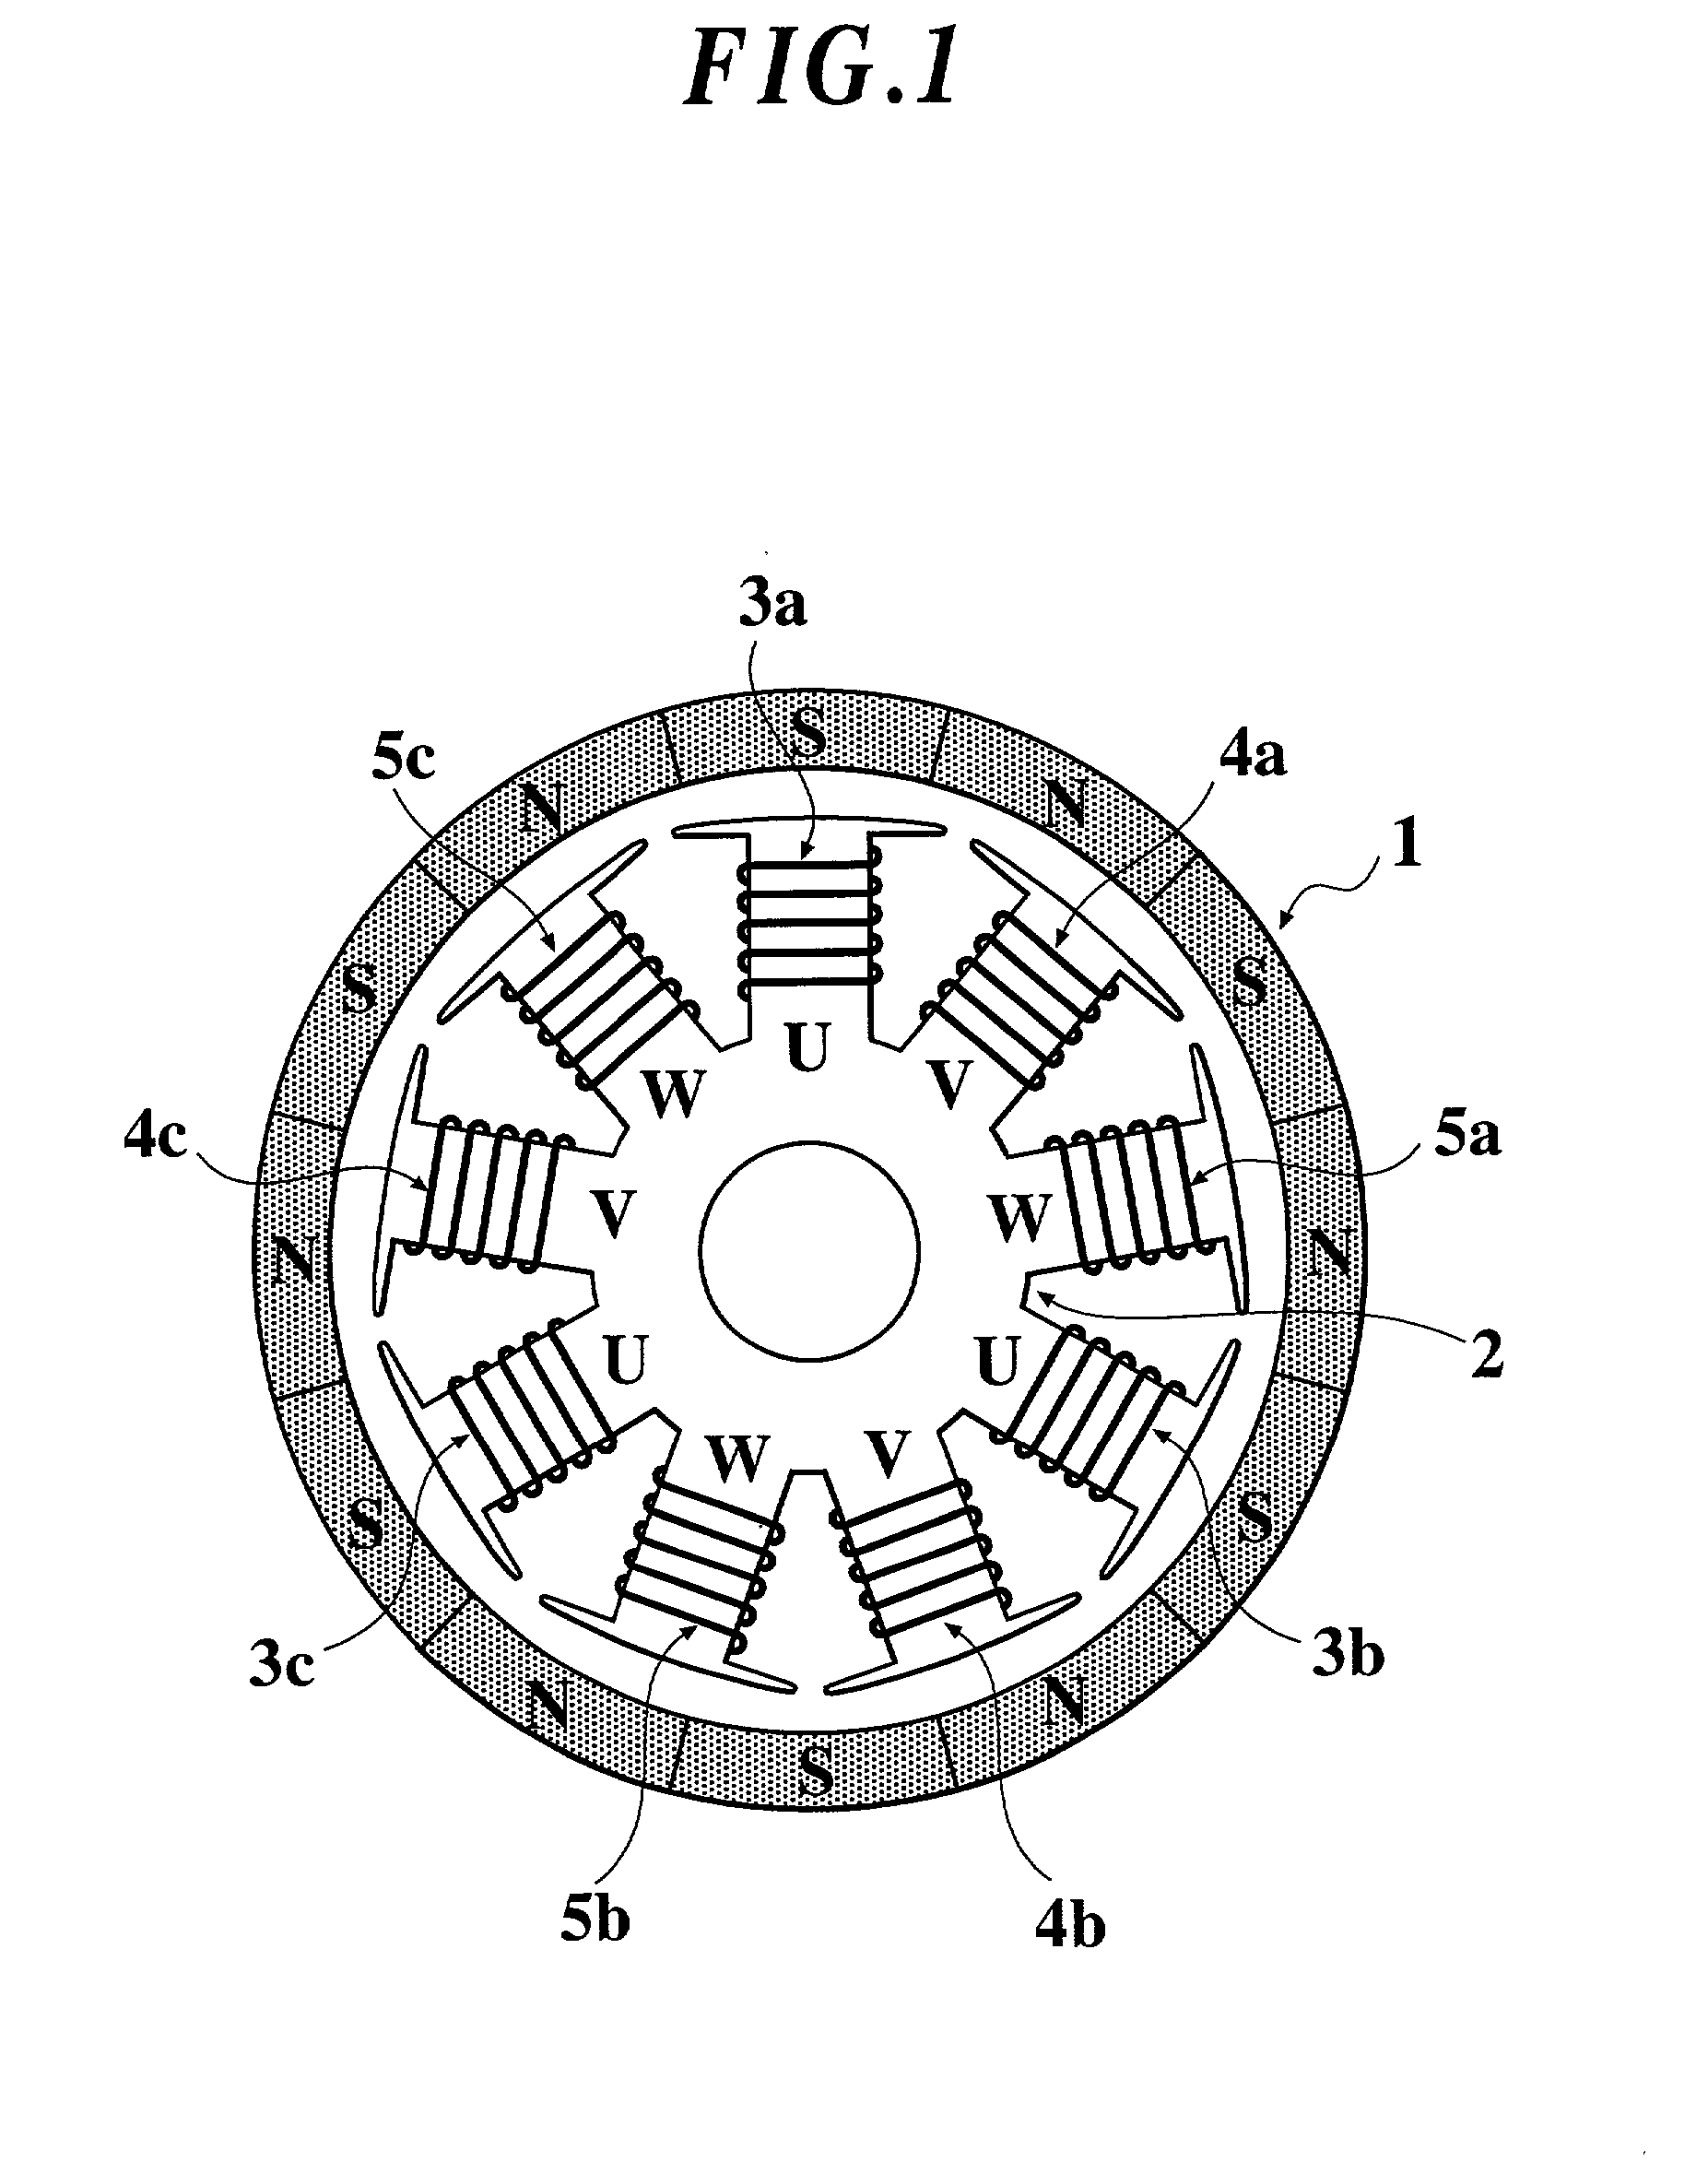 Apparatus for driving three-phase brushless motor